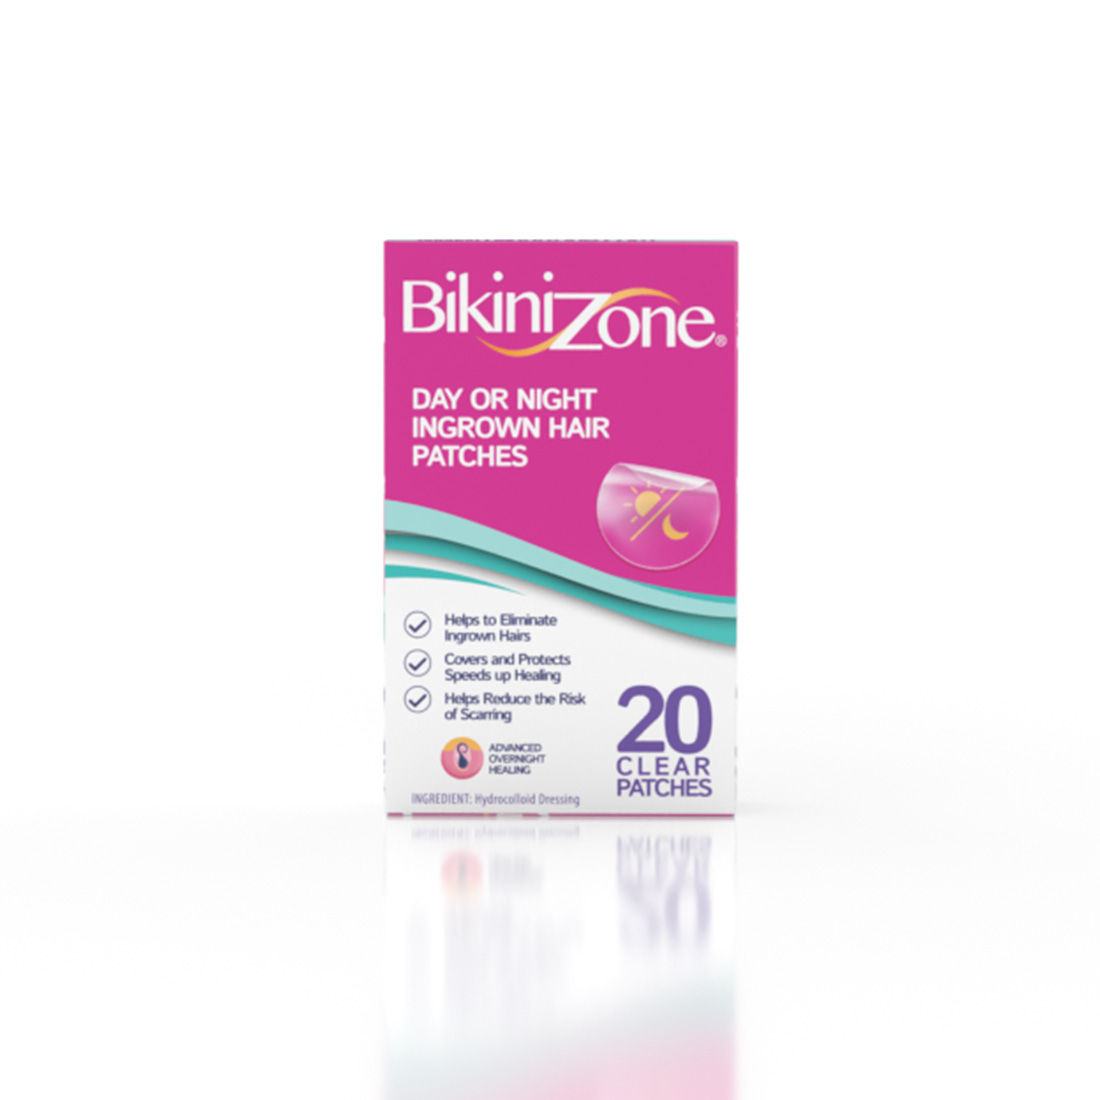 Bikini Zone Day or Night Ingrown Hair Patches, 20 Count